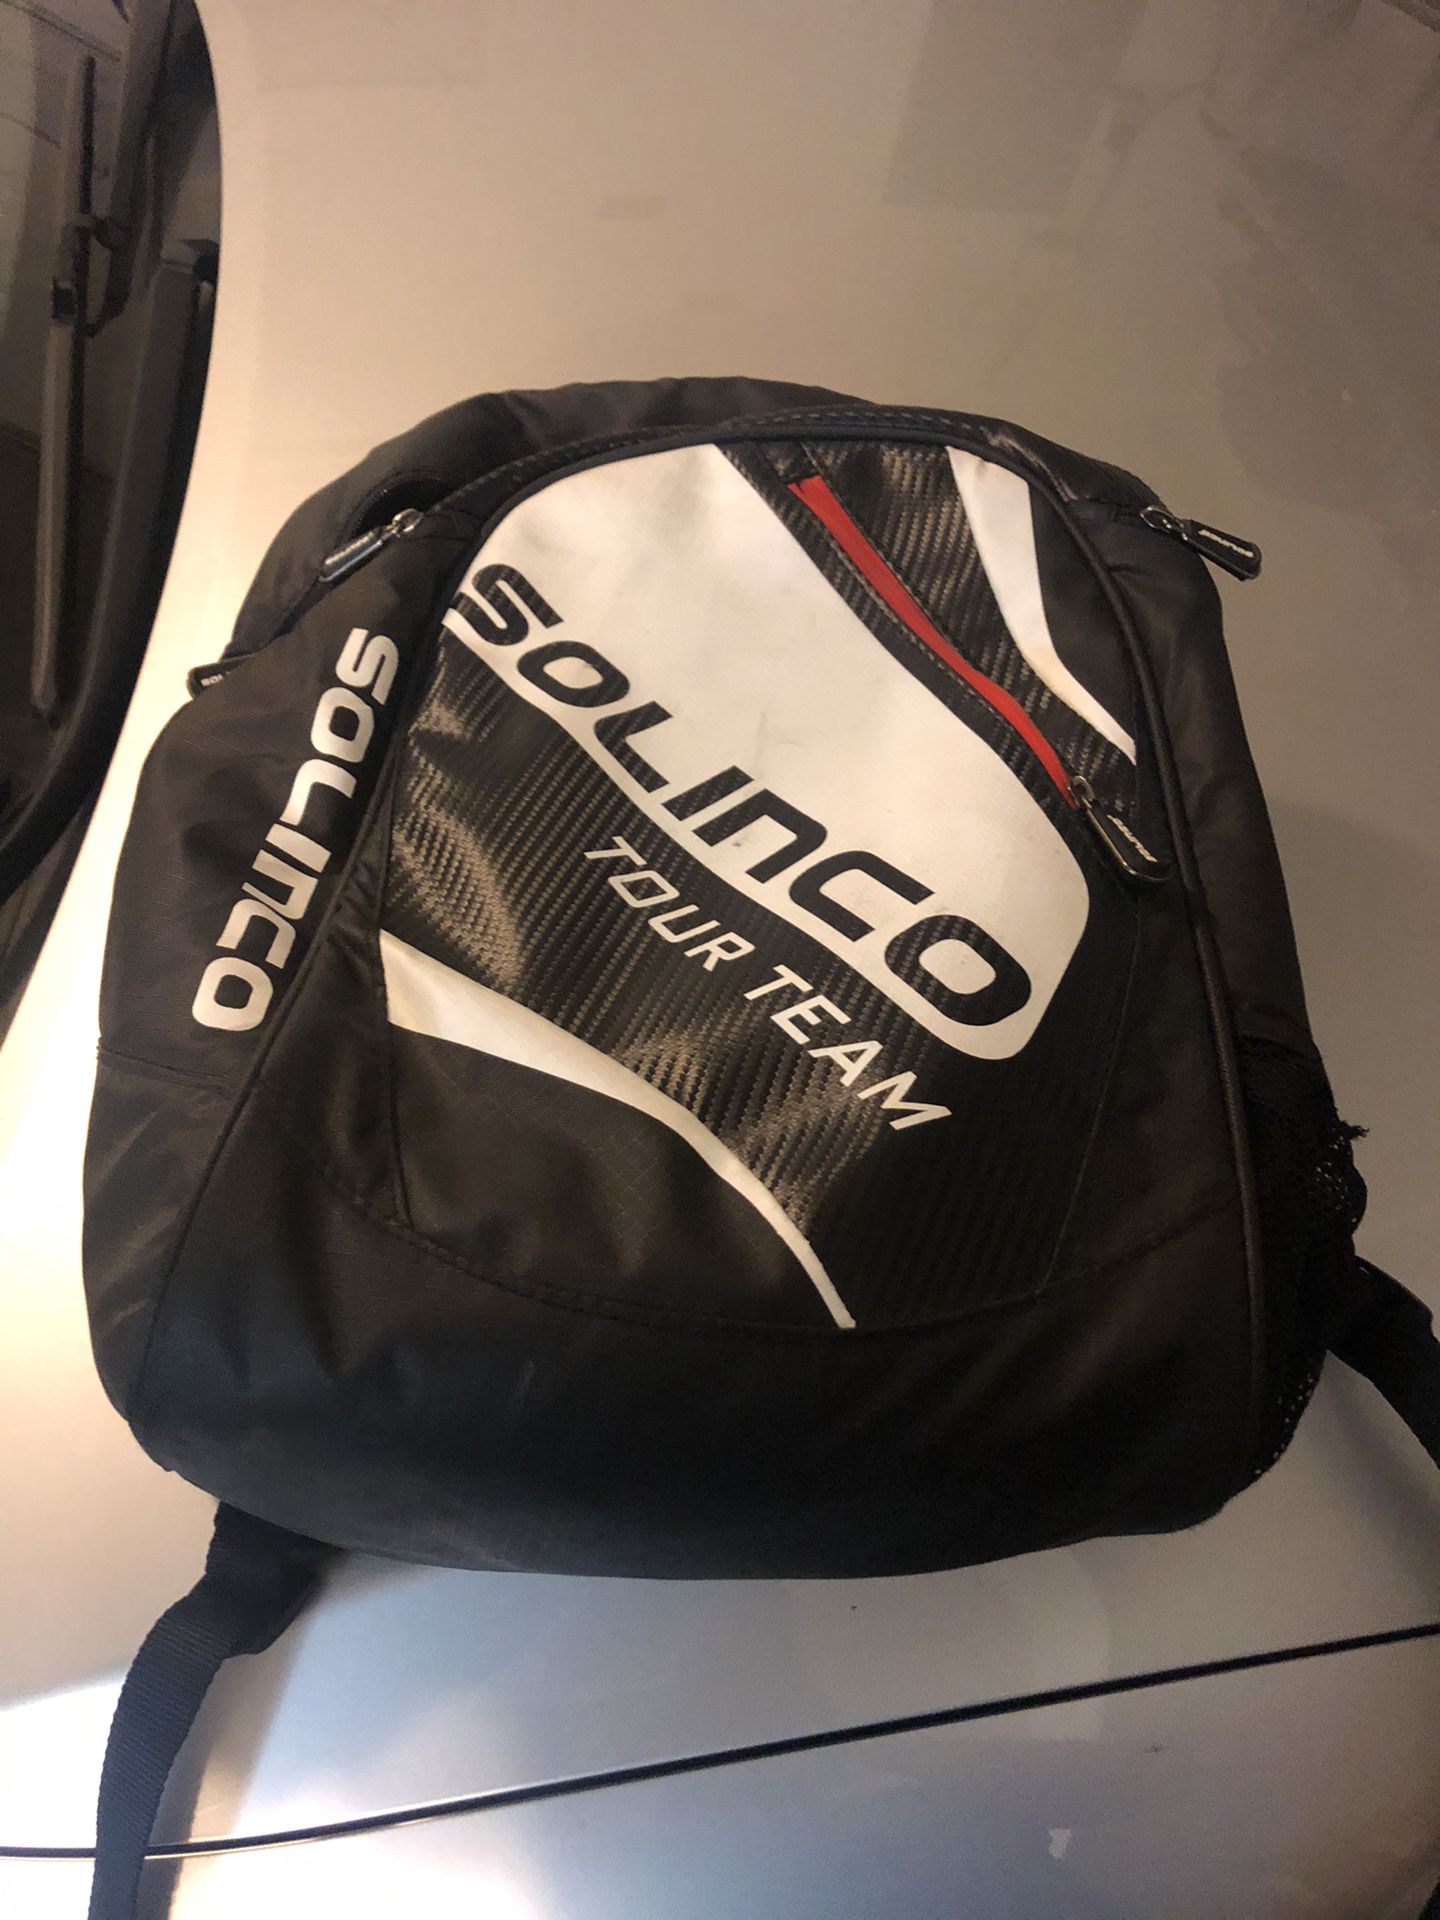 Solinco tennis backpack